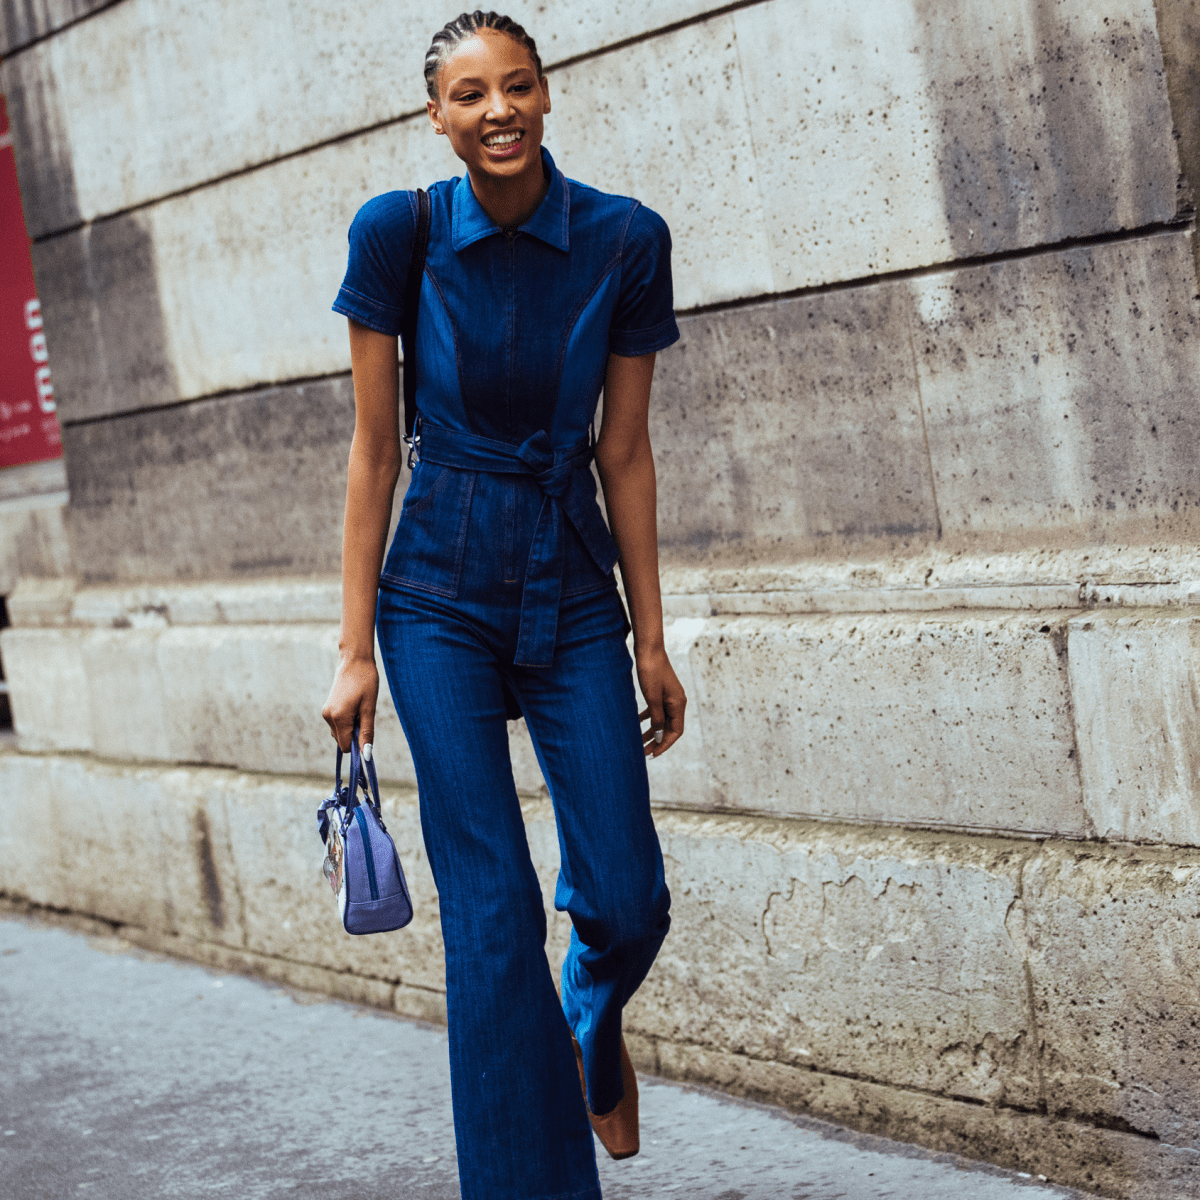 flow Rather Enlighten 13 Denim Jumpsuits on Sale That You'll Want To Wear on Repeat - Fashionista